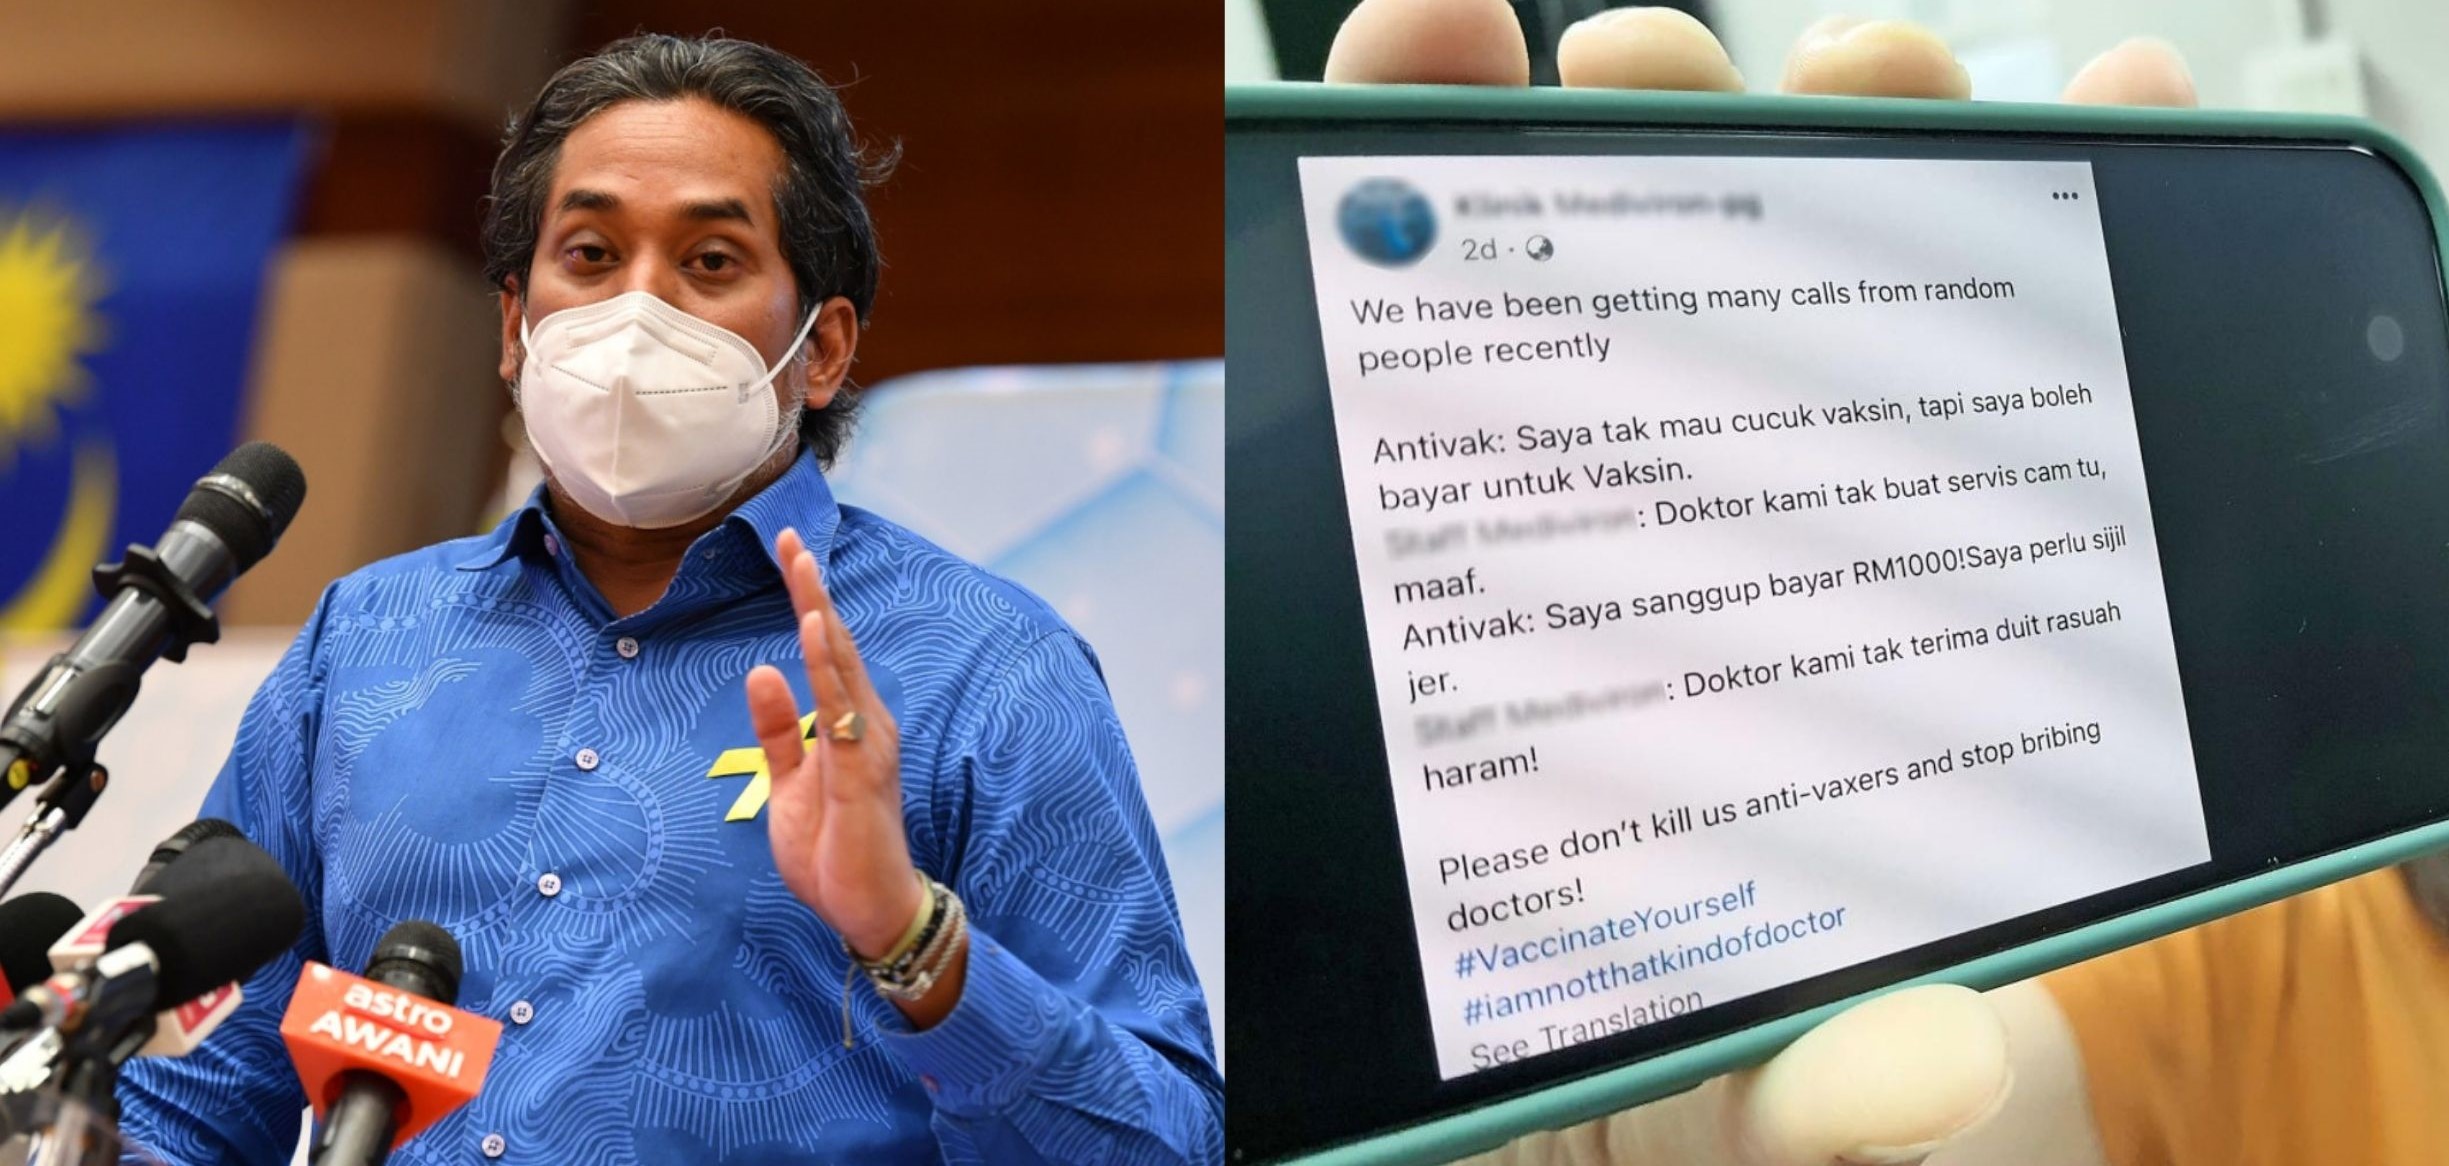 Khairy sets things straight and makes it clear to them to get vaccinated.